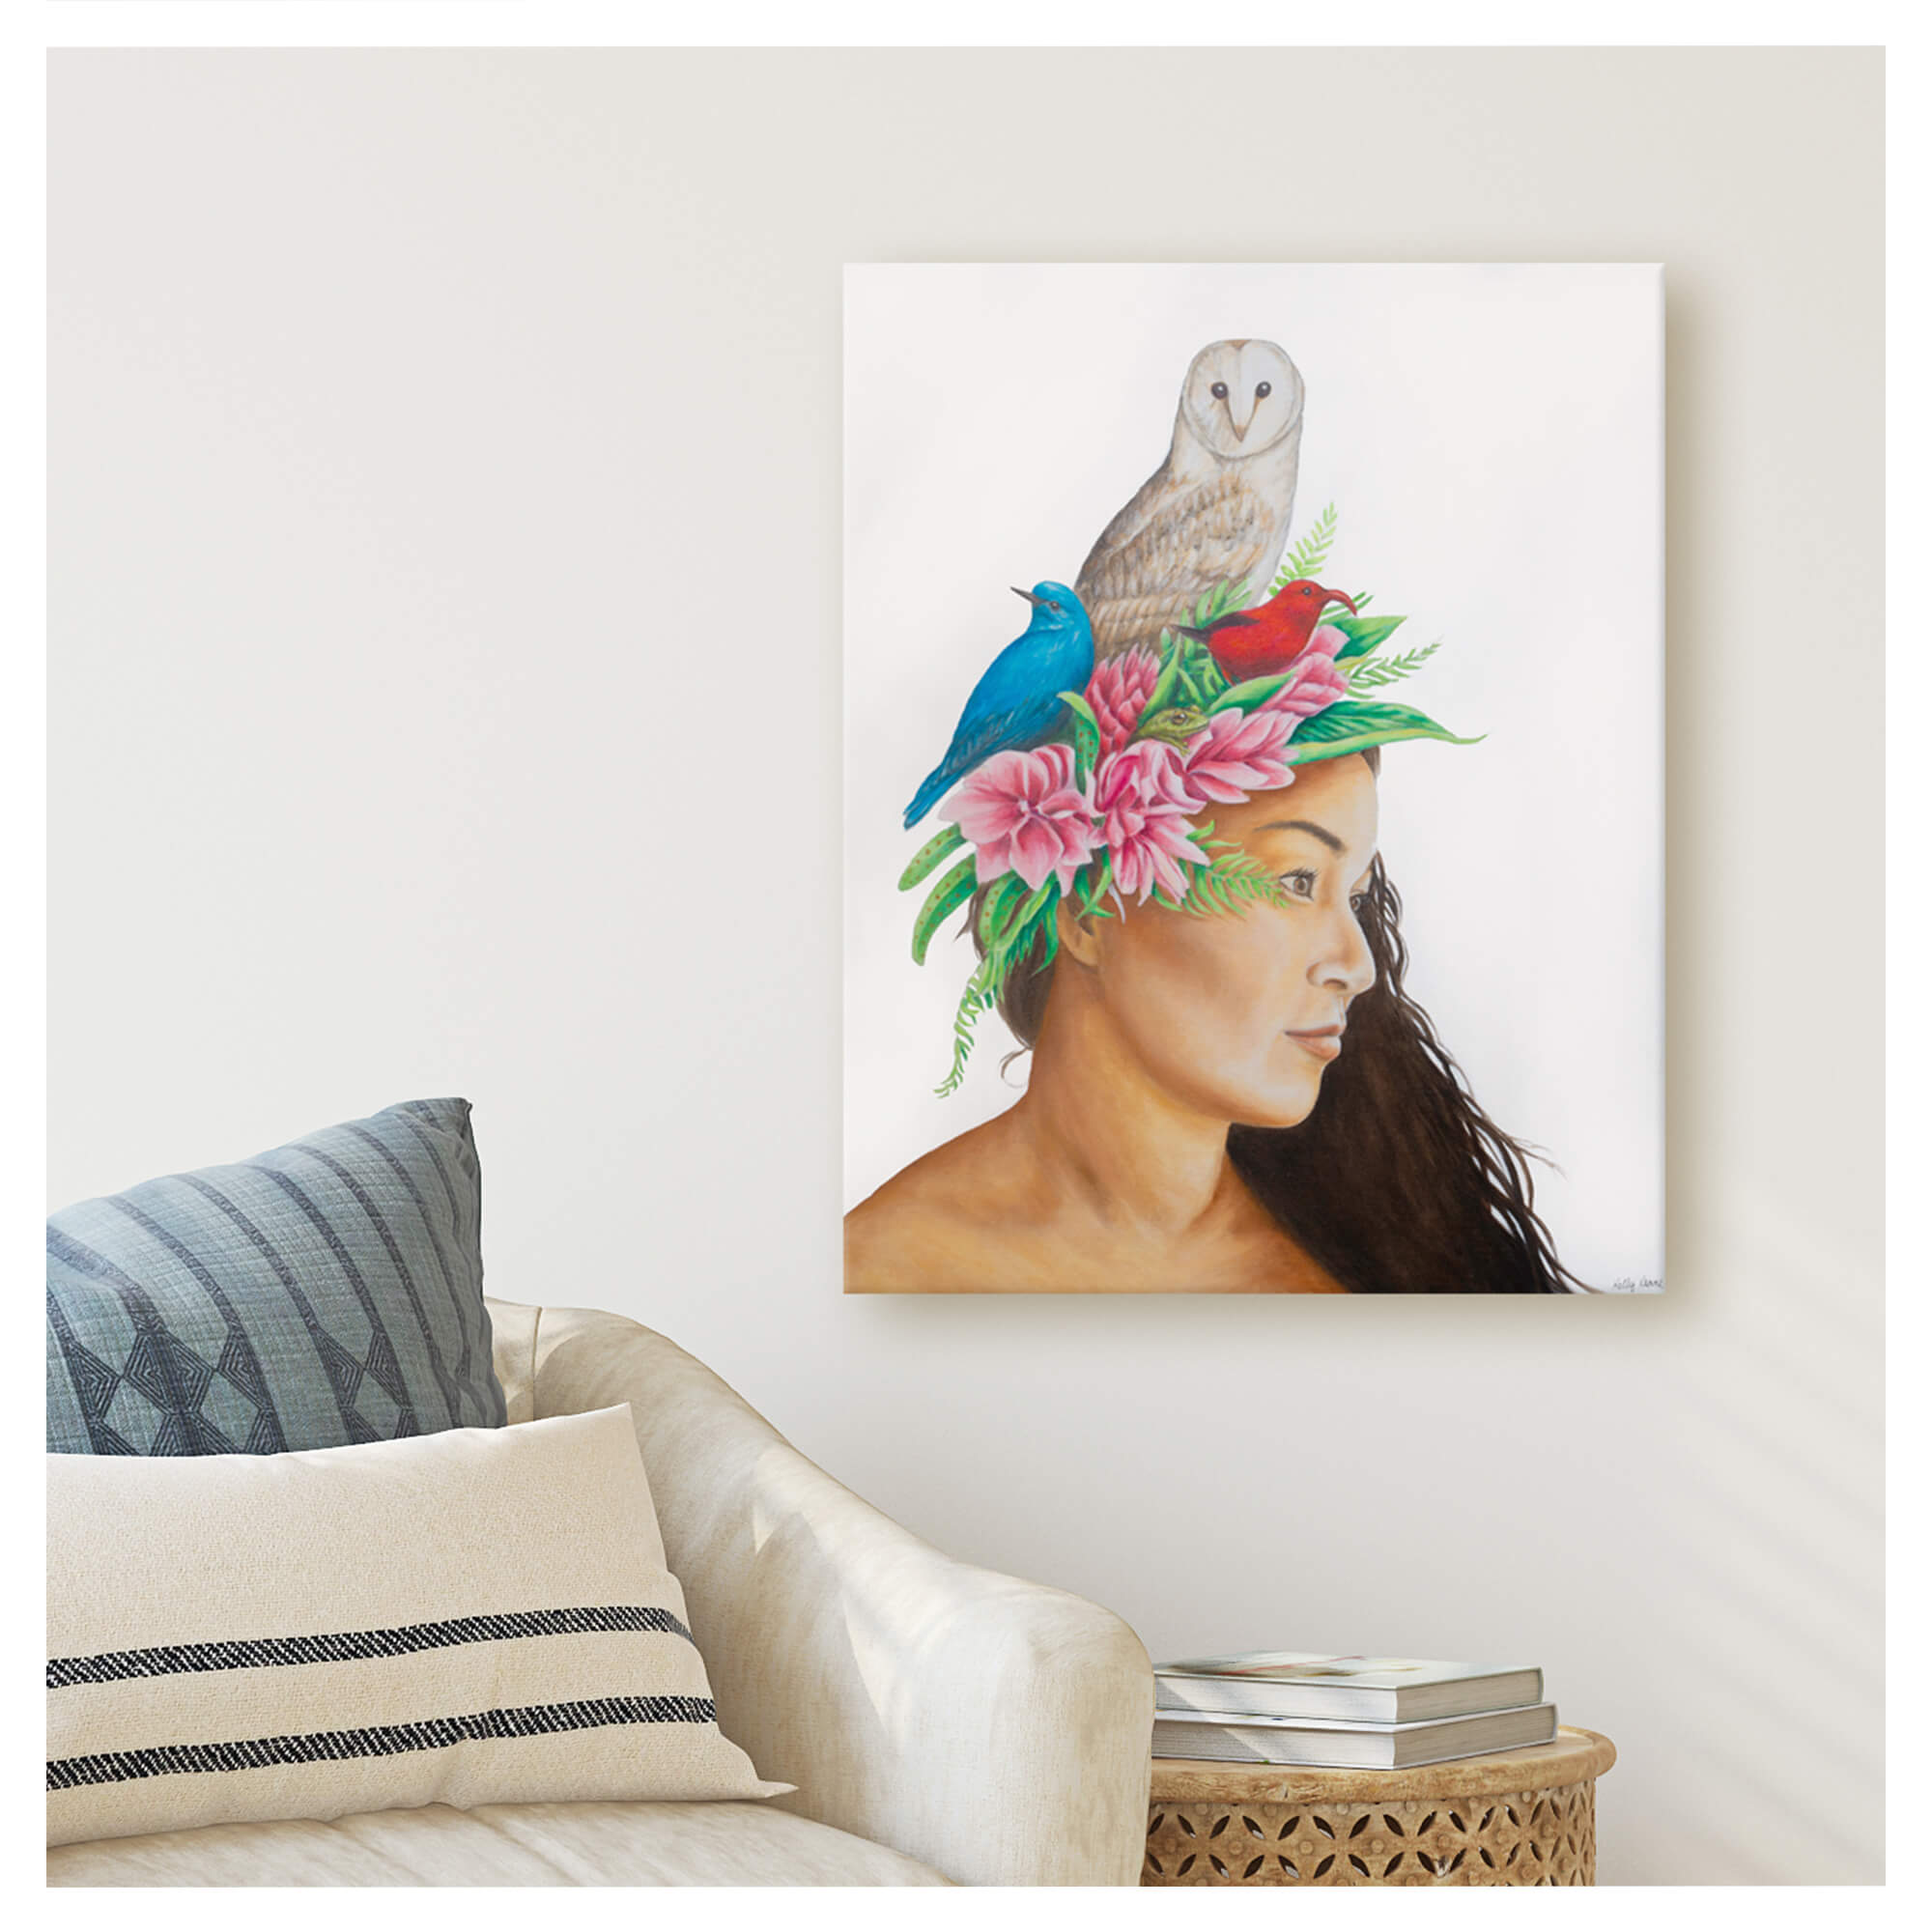 Canvas art print featuring a woman with an owl on her head by hawaii artist Kelly Keane